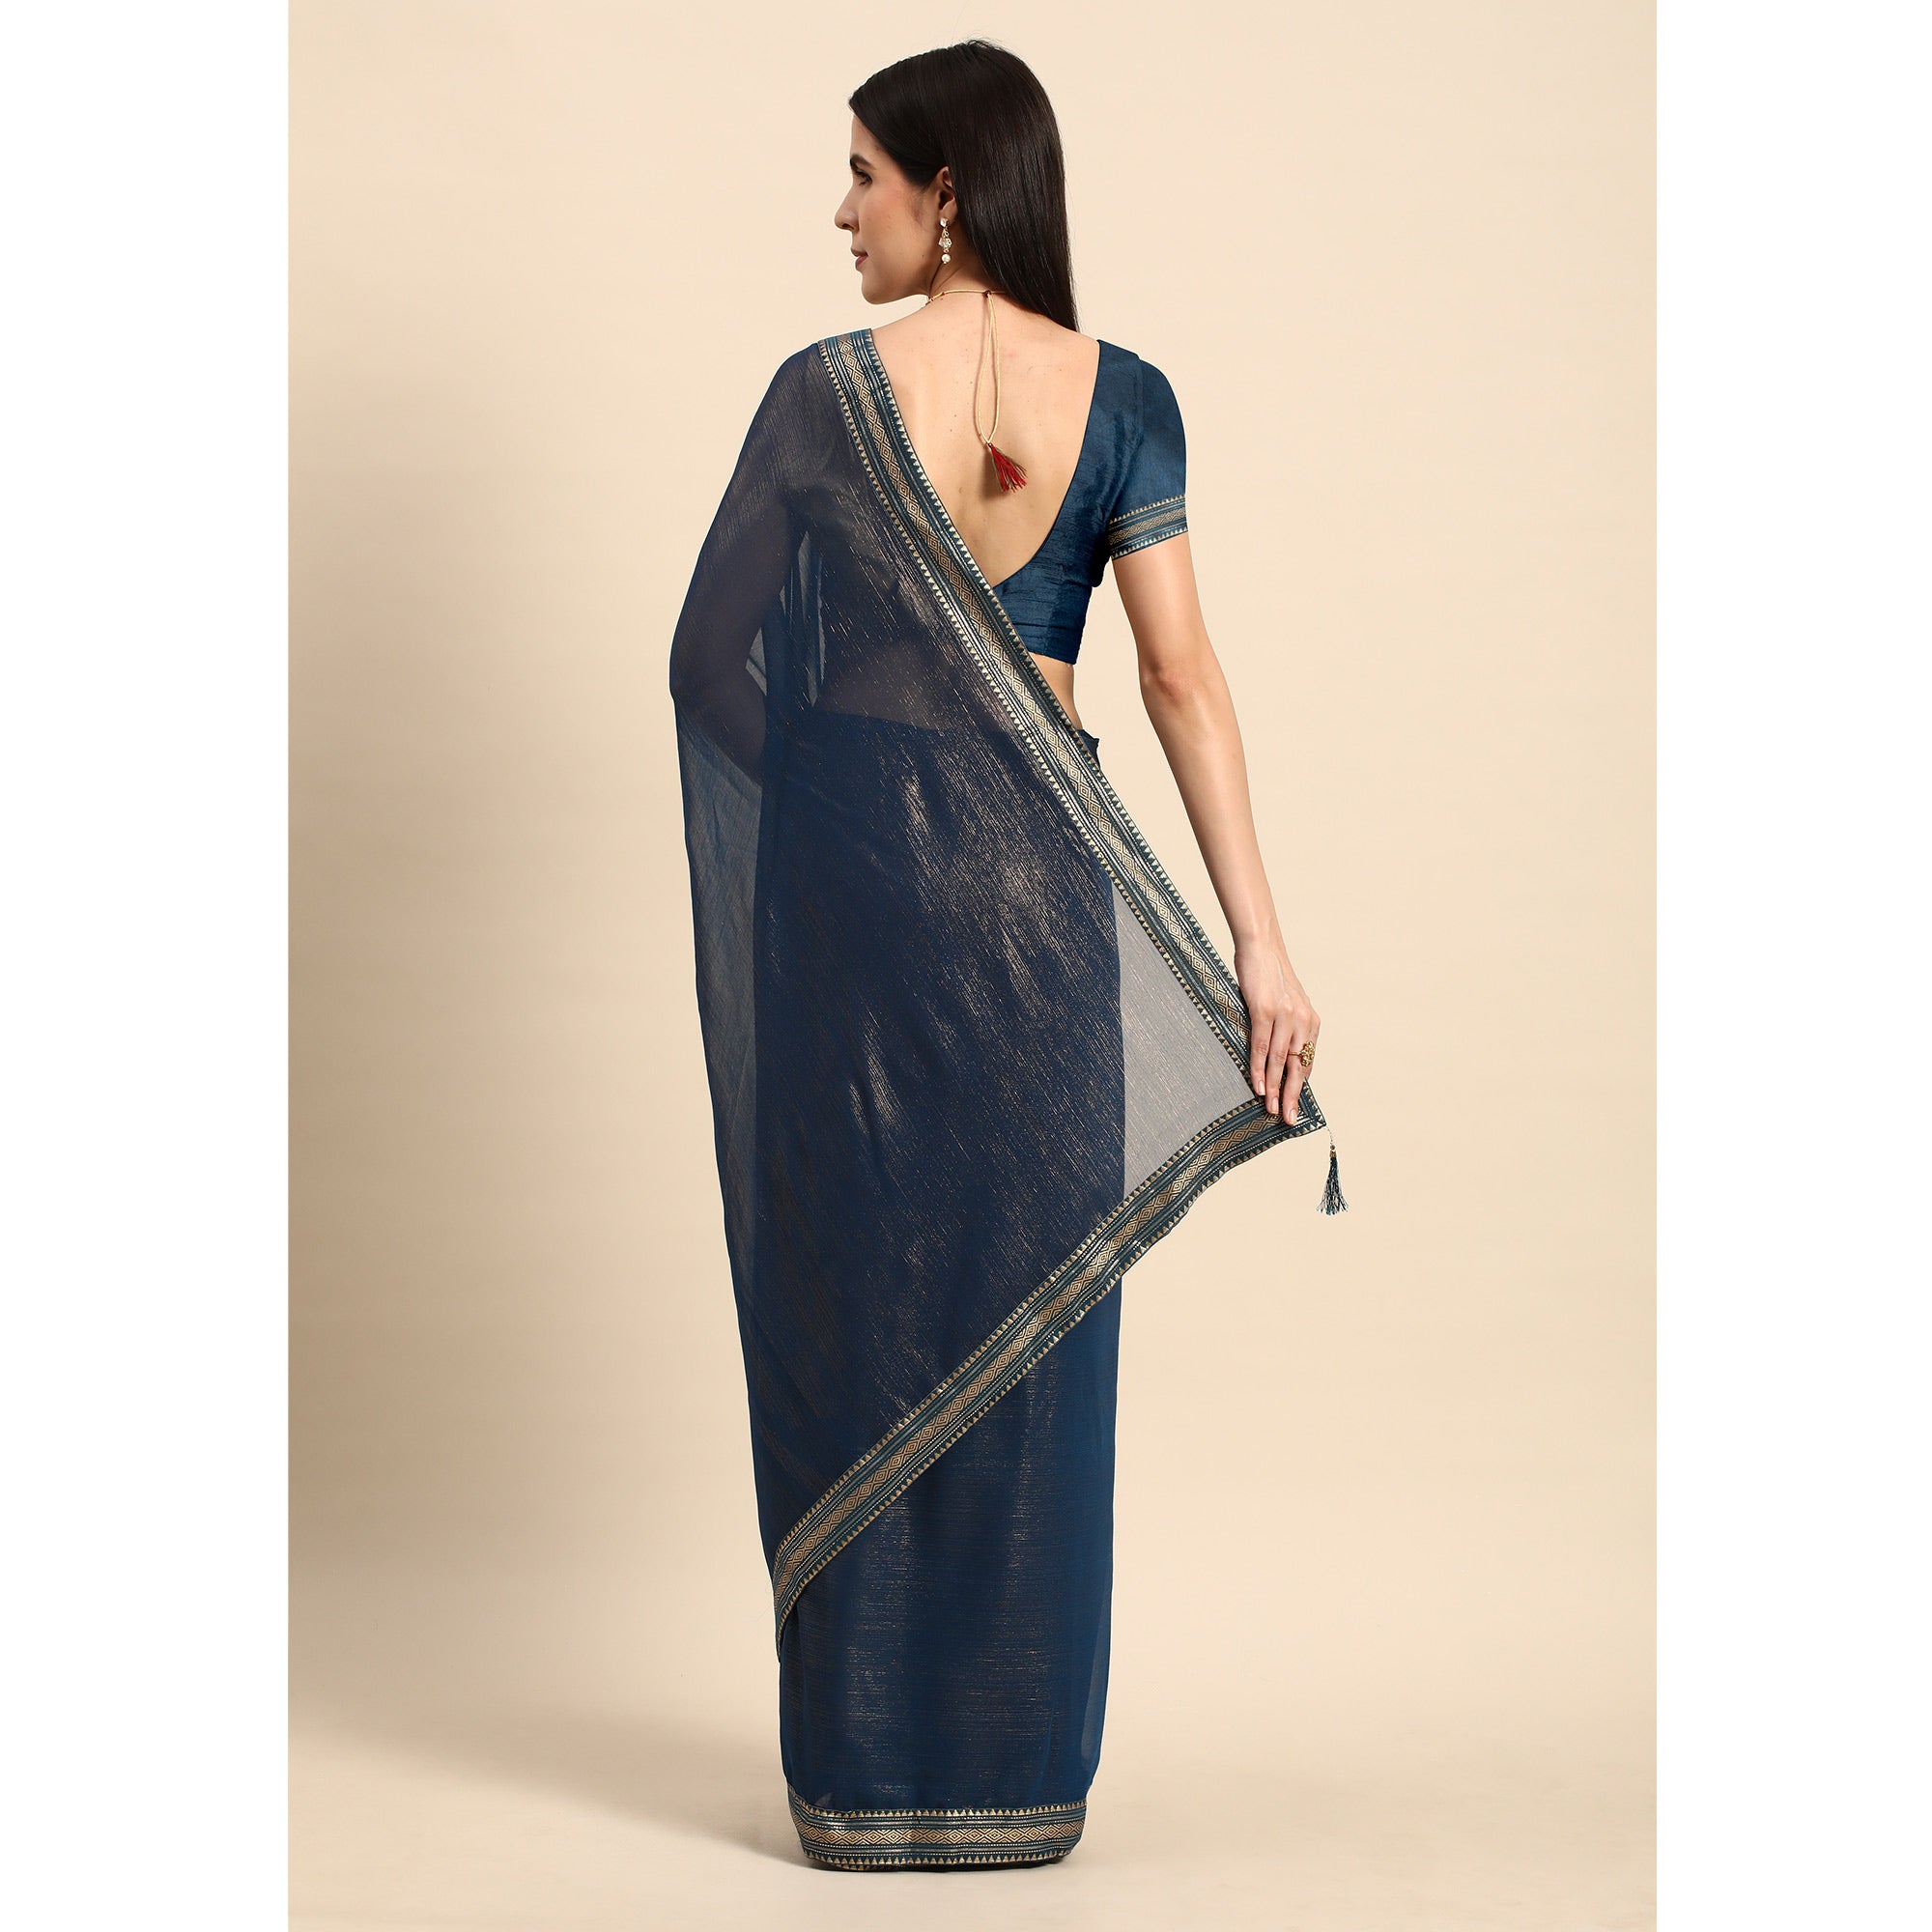 Blue Solid With Woven Border Chiffon Saree With Tassels